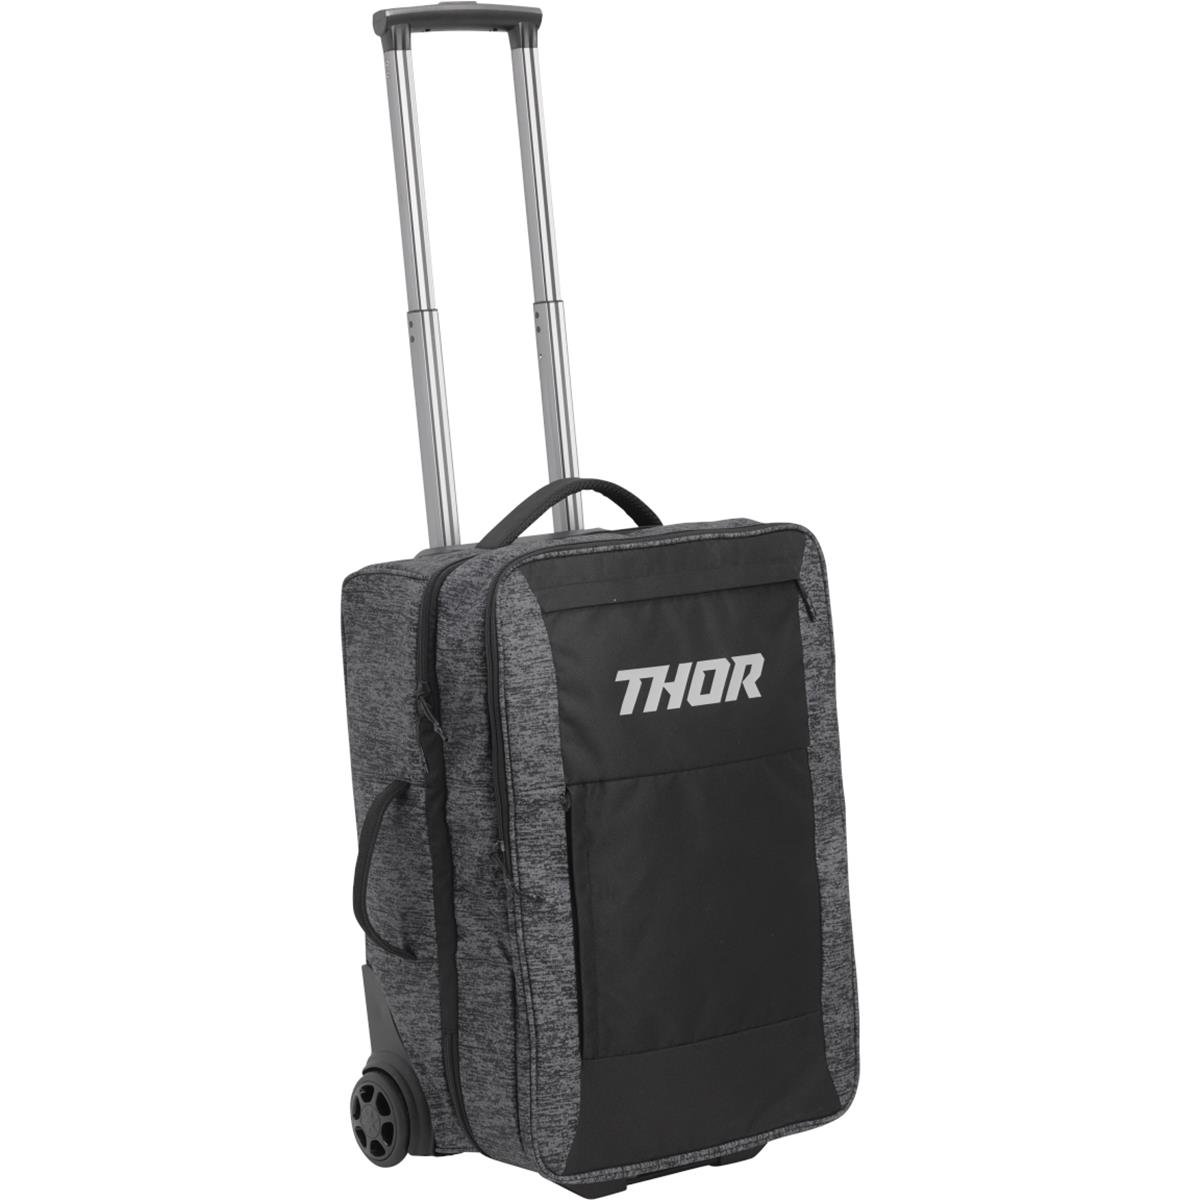 Thor Rollerbag Jetway Charcoal/Heather